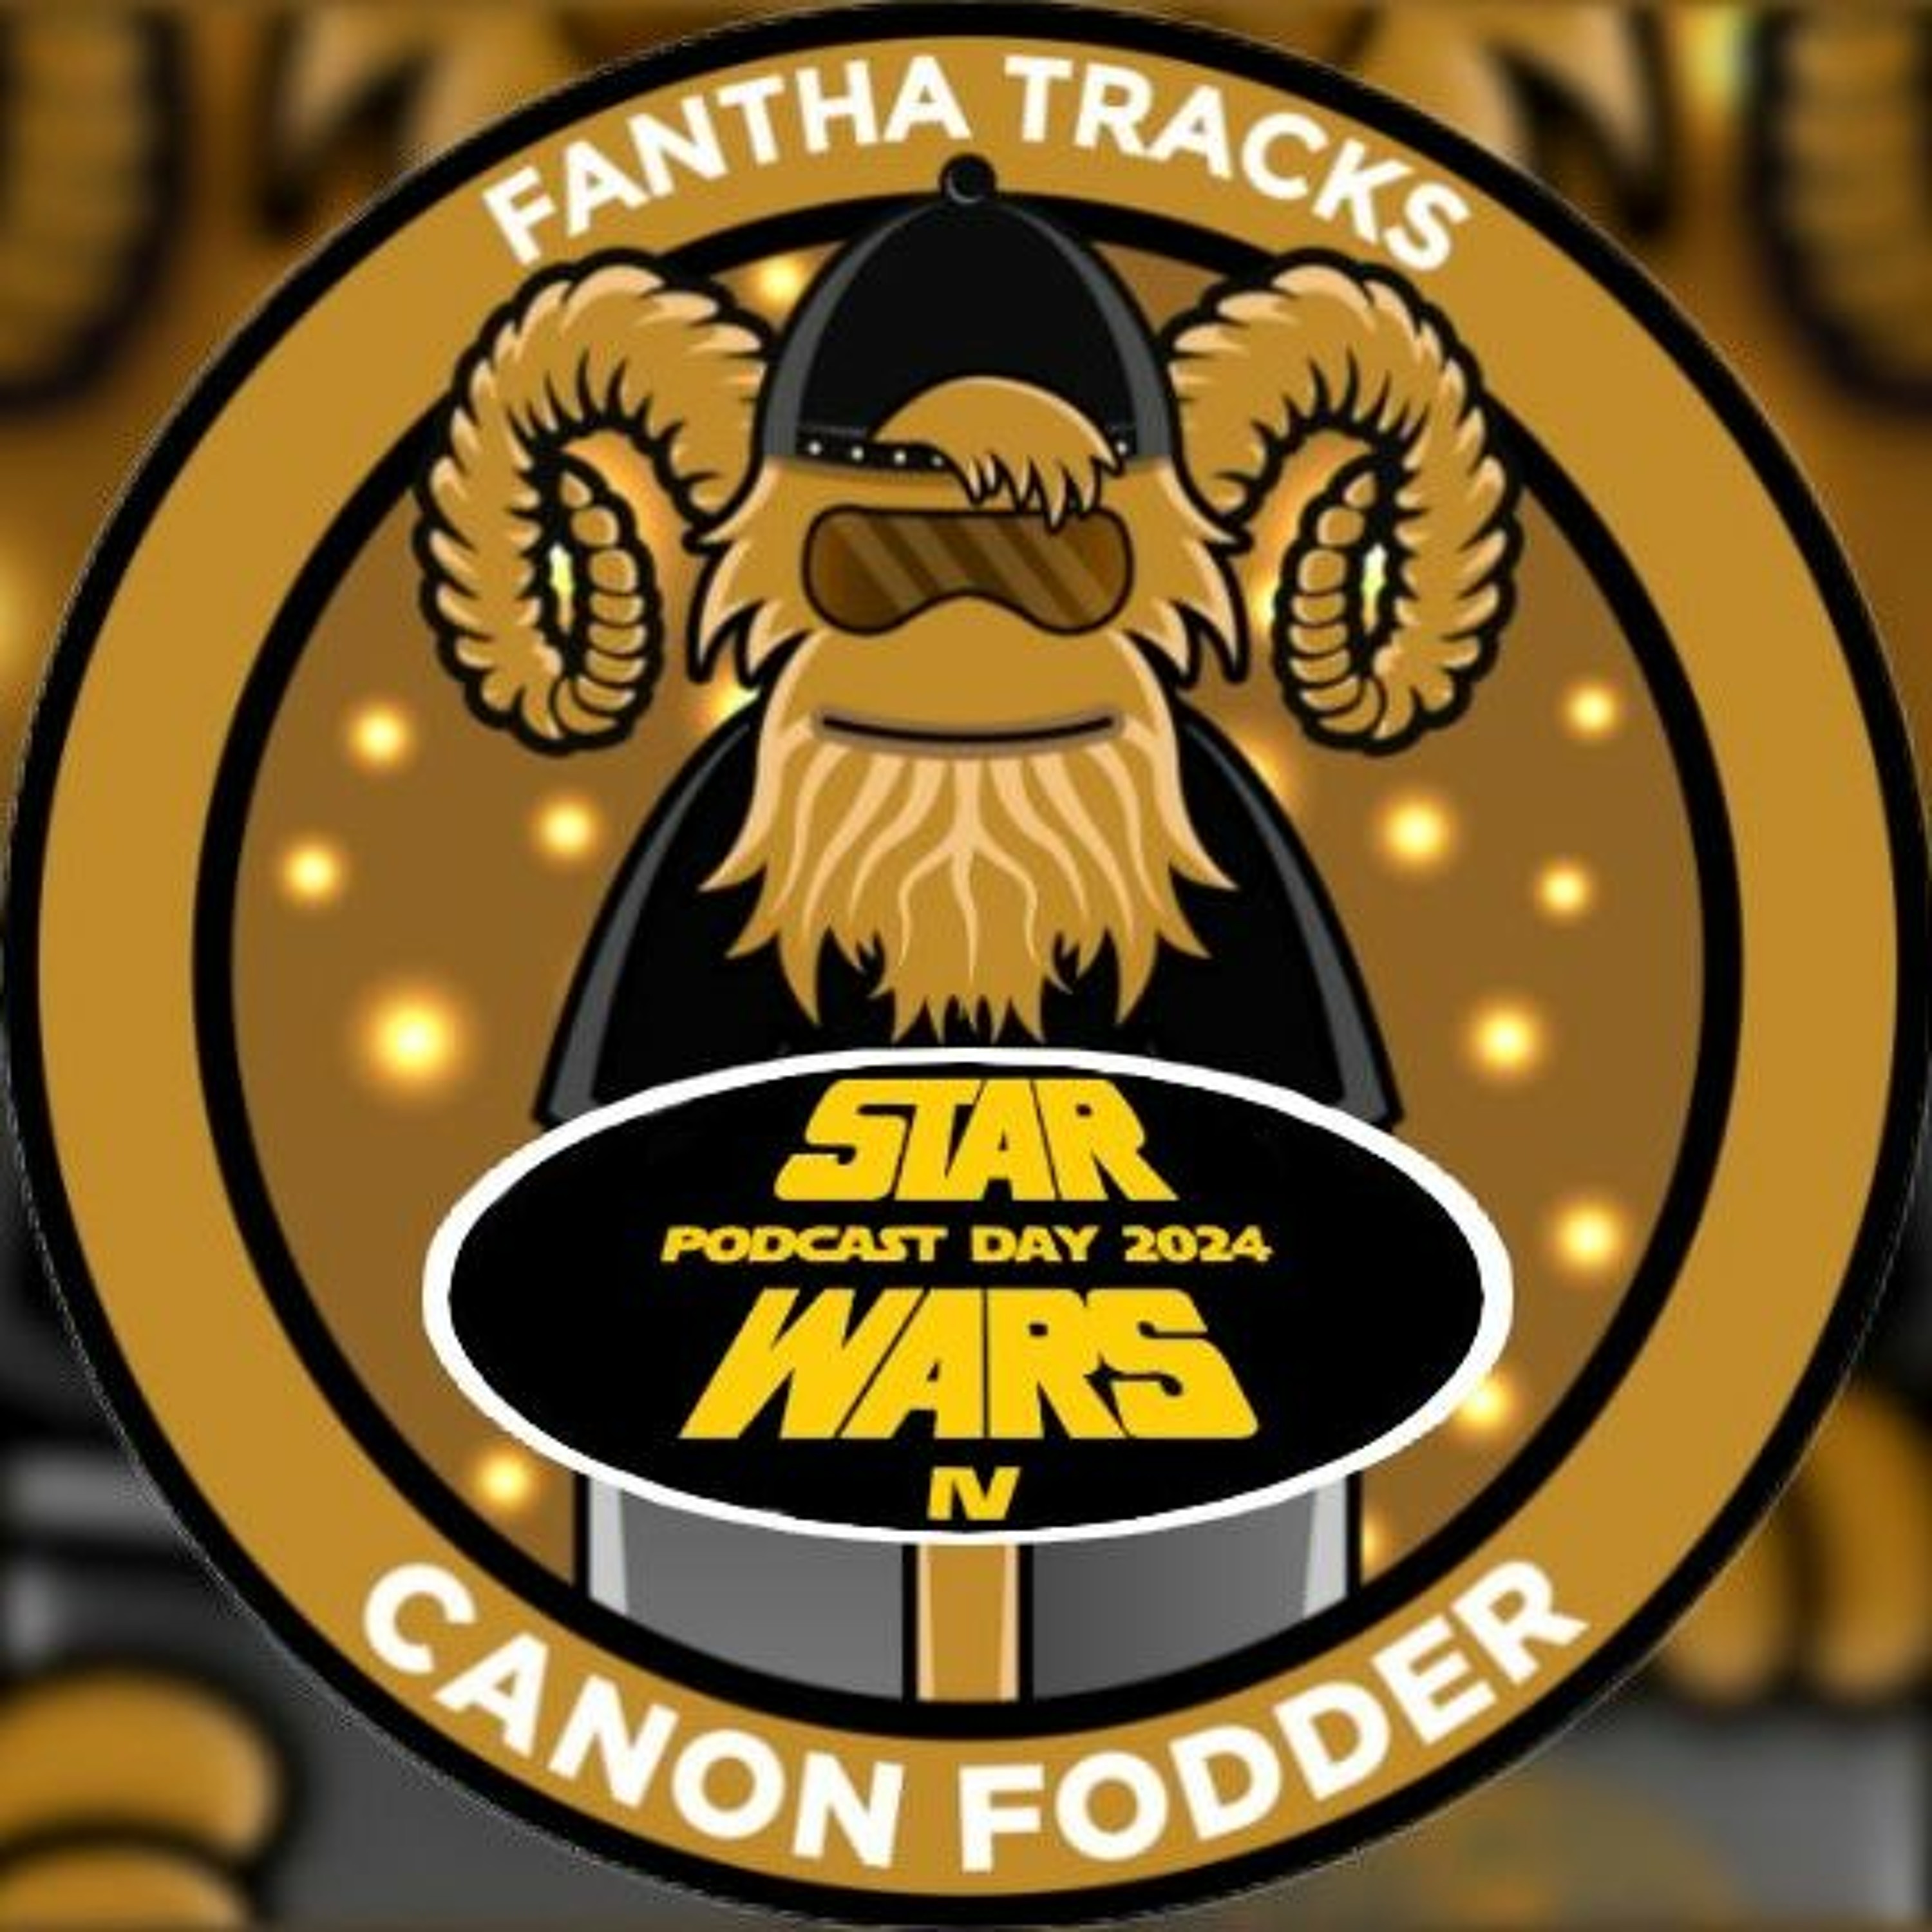 Canon Fodder: In conversation with Ethan Sacks: Star Wars Podcast Day 2024